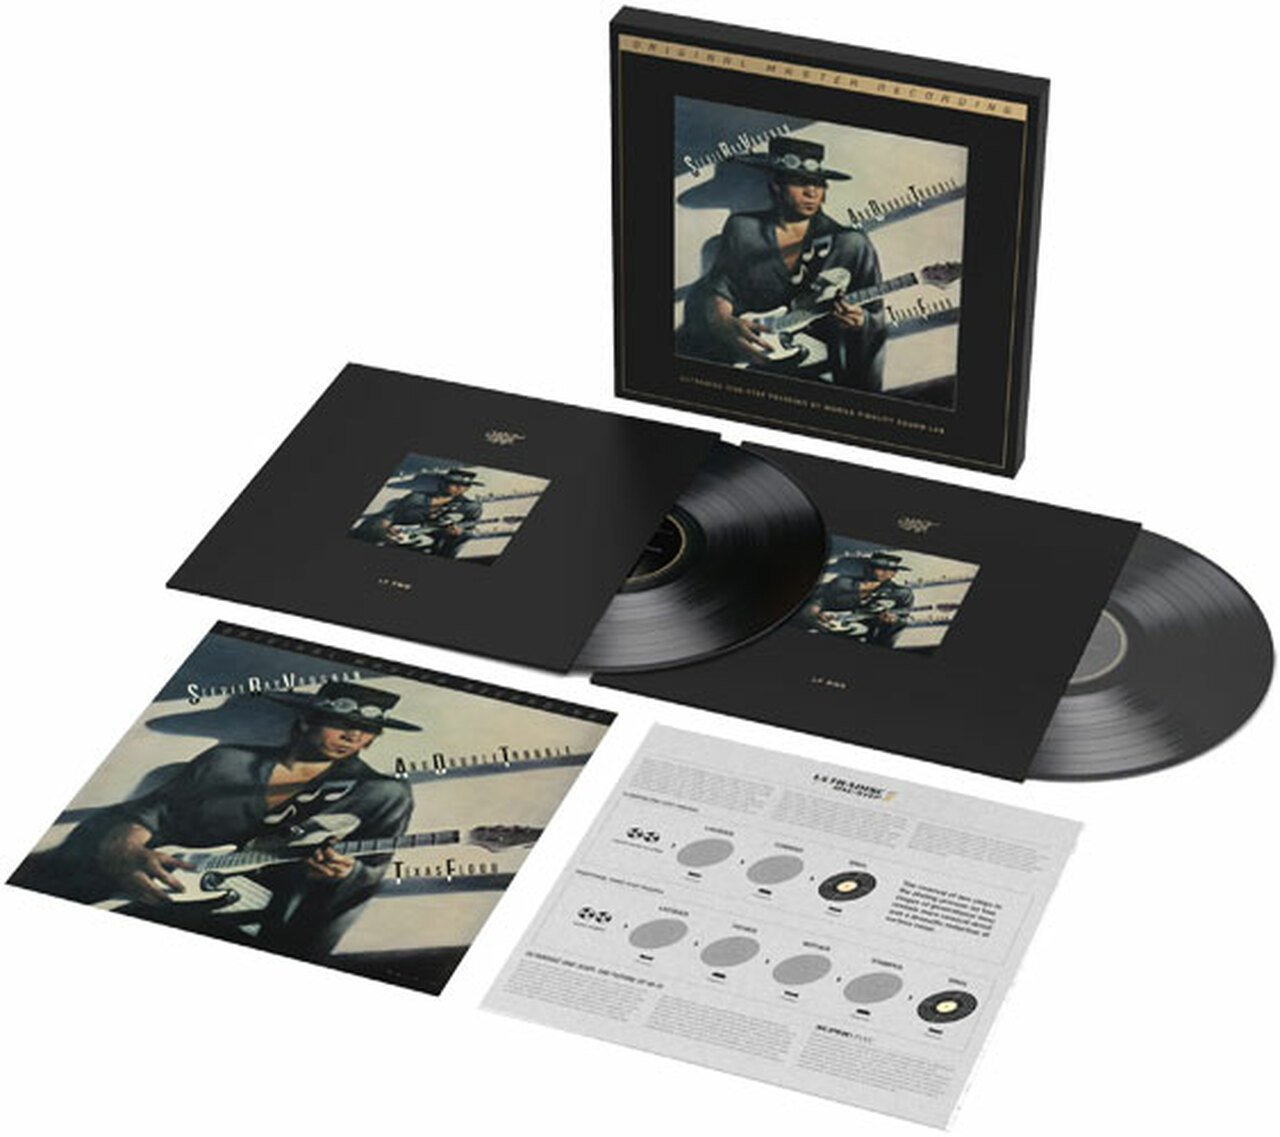 Stevie Ray Vaughan - Couldn't Stand the weather [2LP]